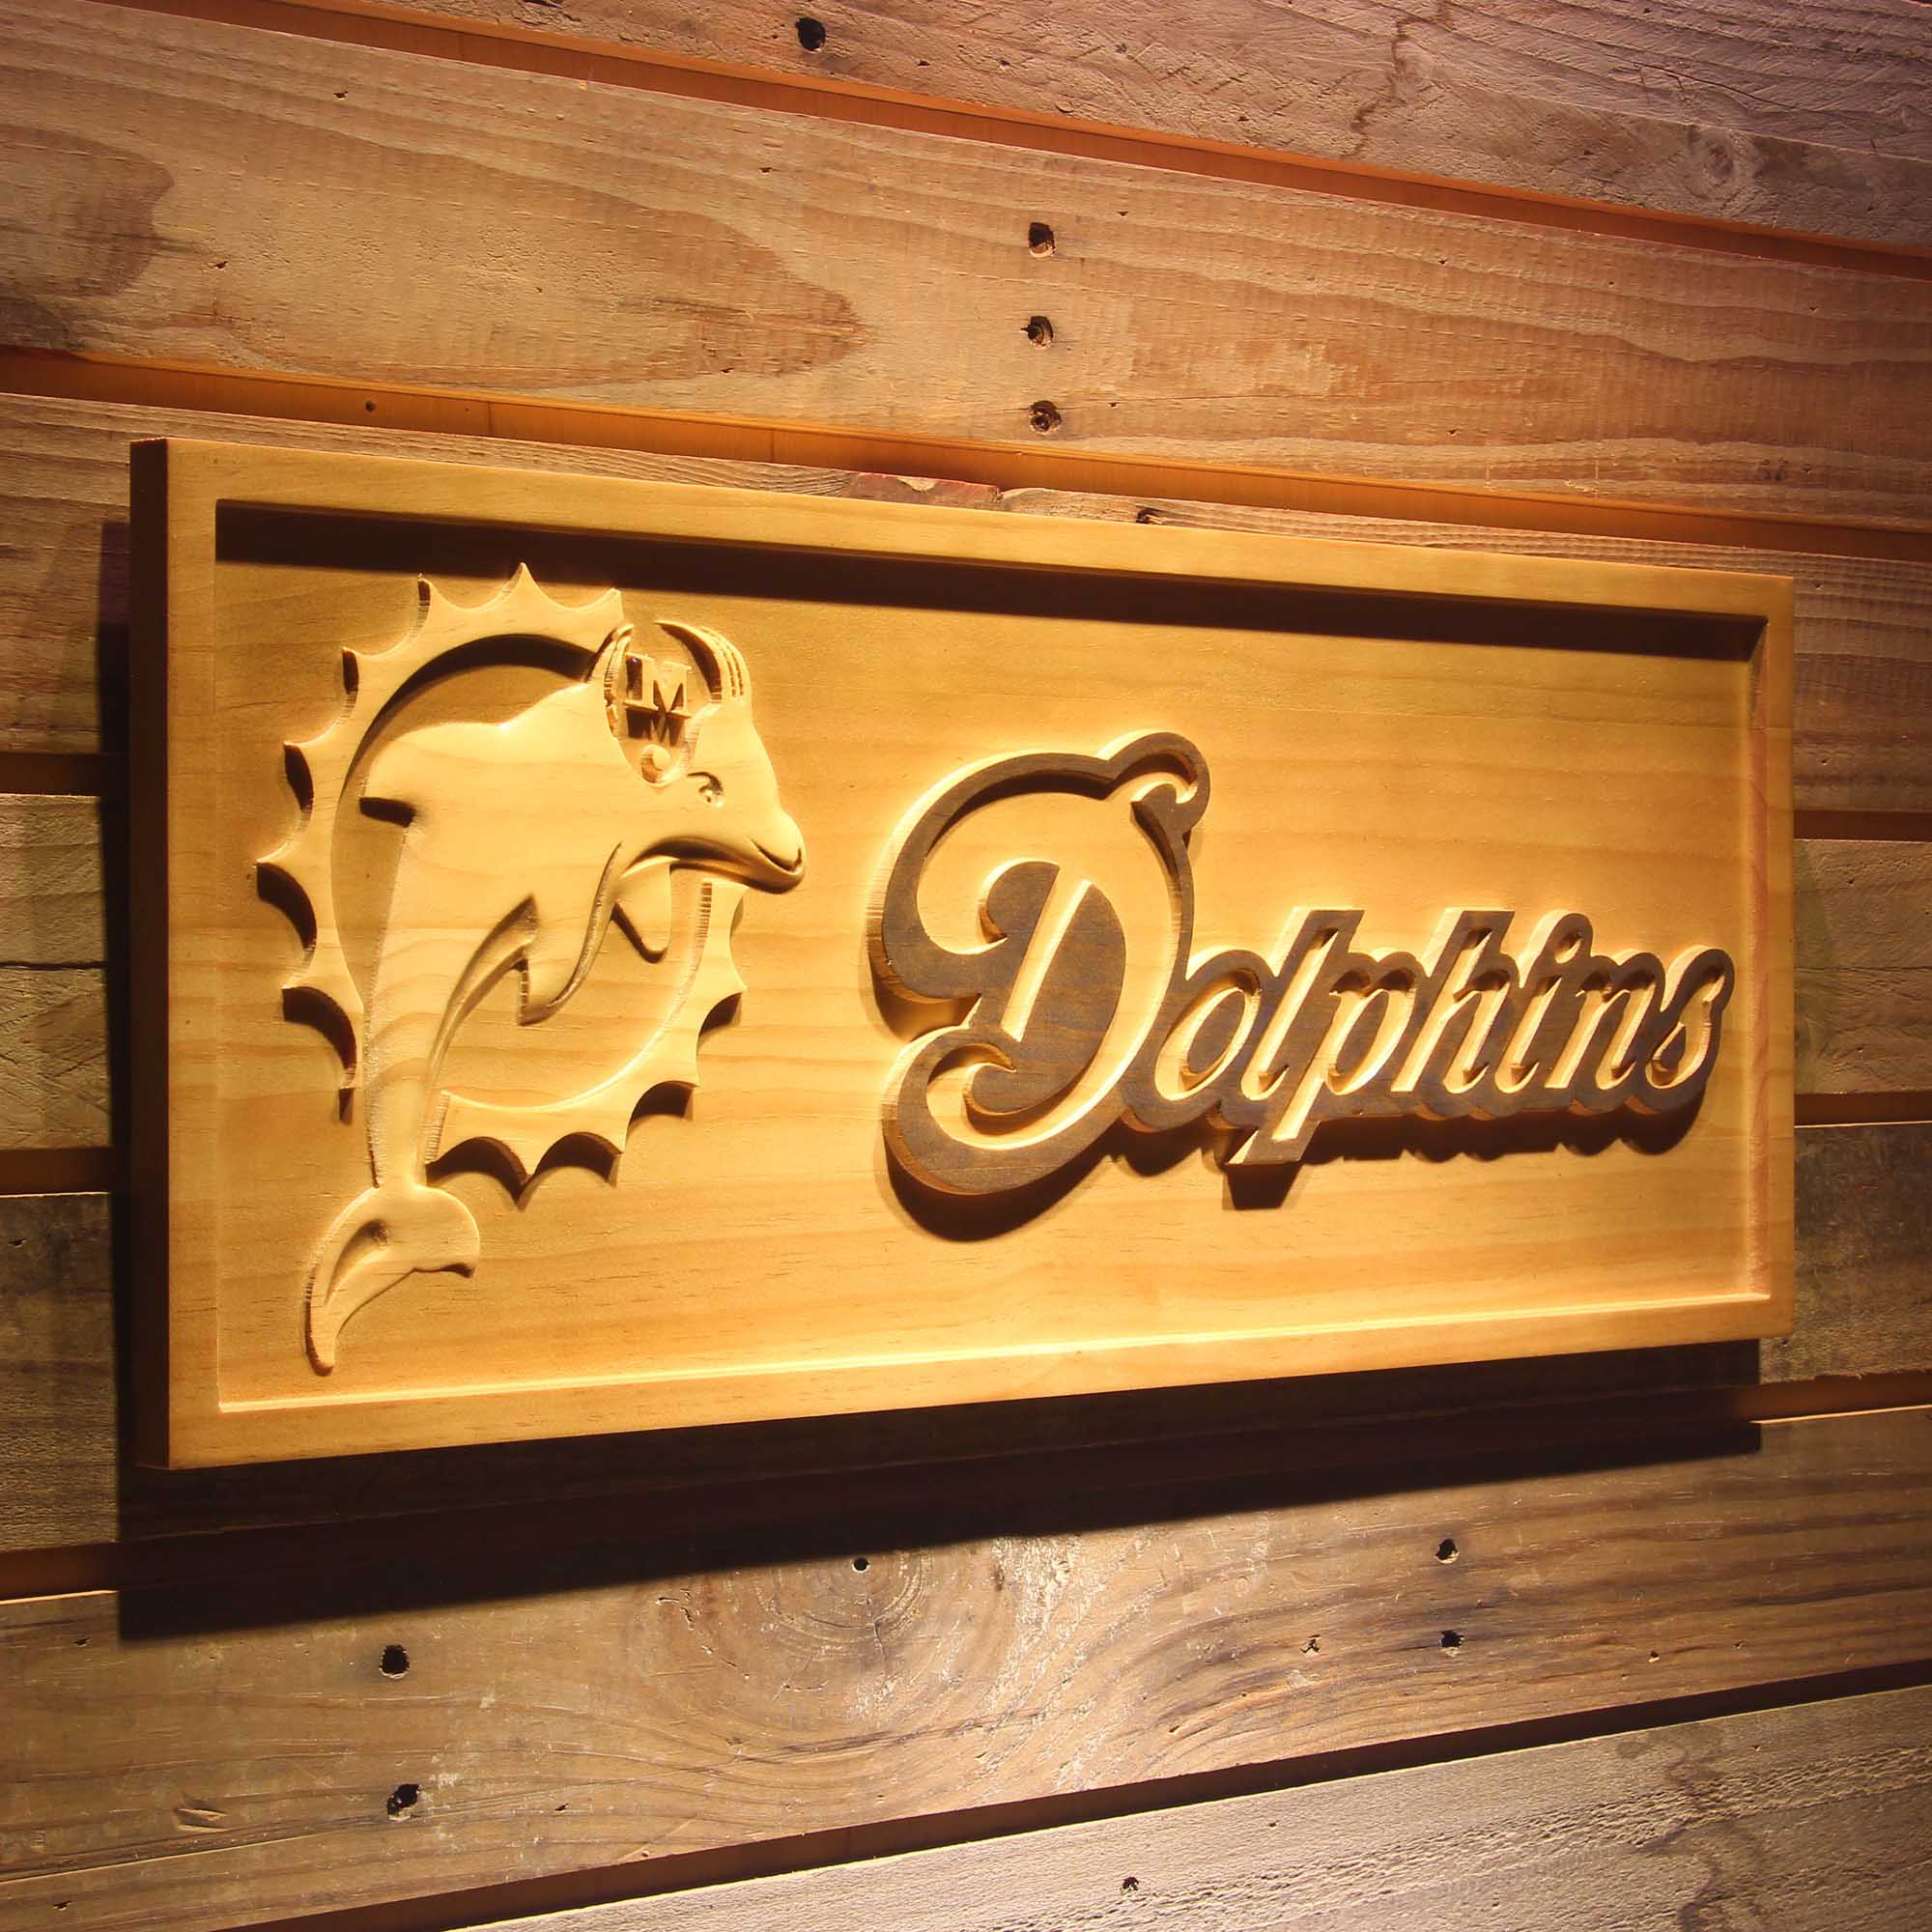 Miami Dolphins 3D Wooden Engrave Sign